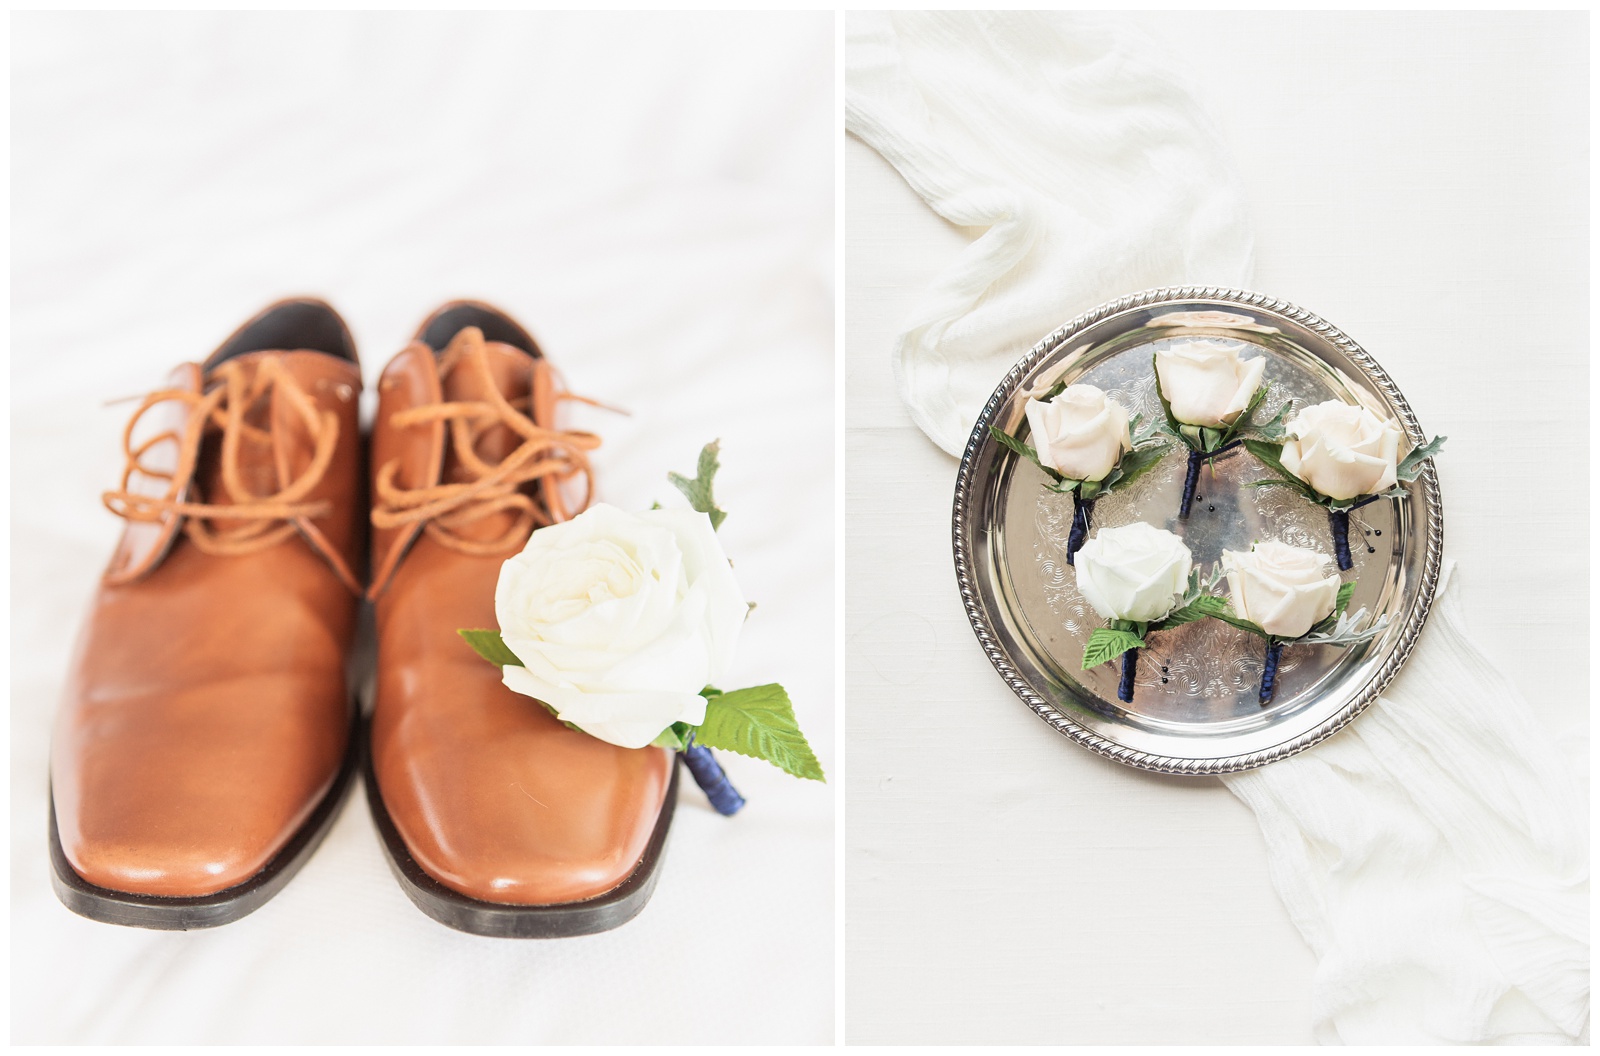 Groom's shoes and boutonnières | Matlock and Kelly Photography